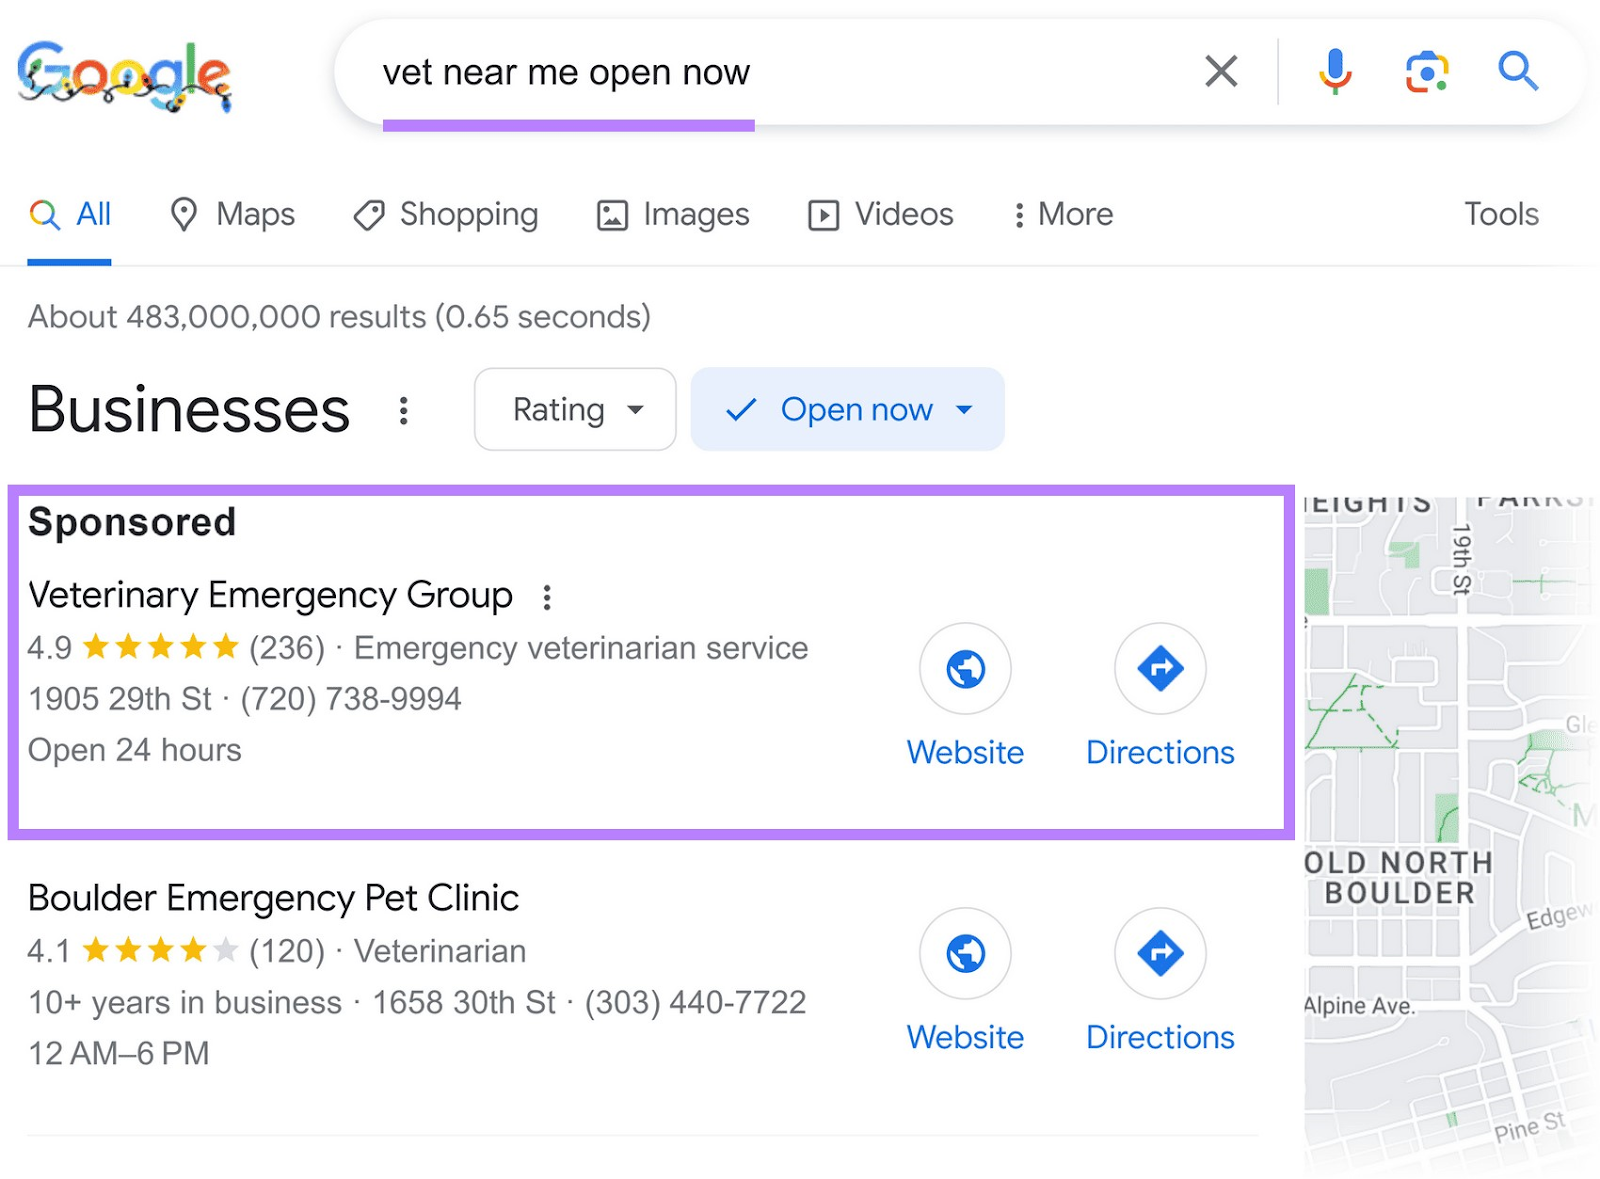 Google ad for “vet near me open now” query